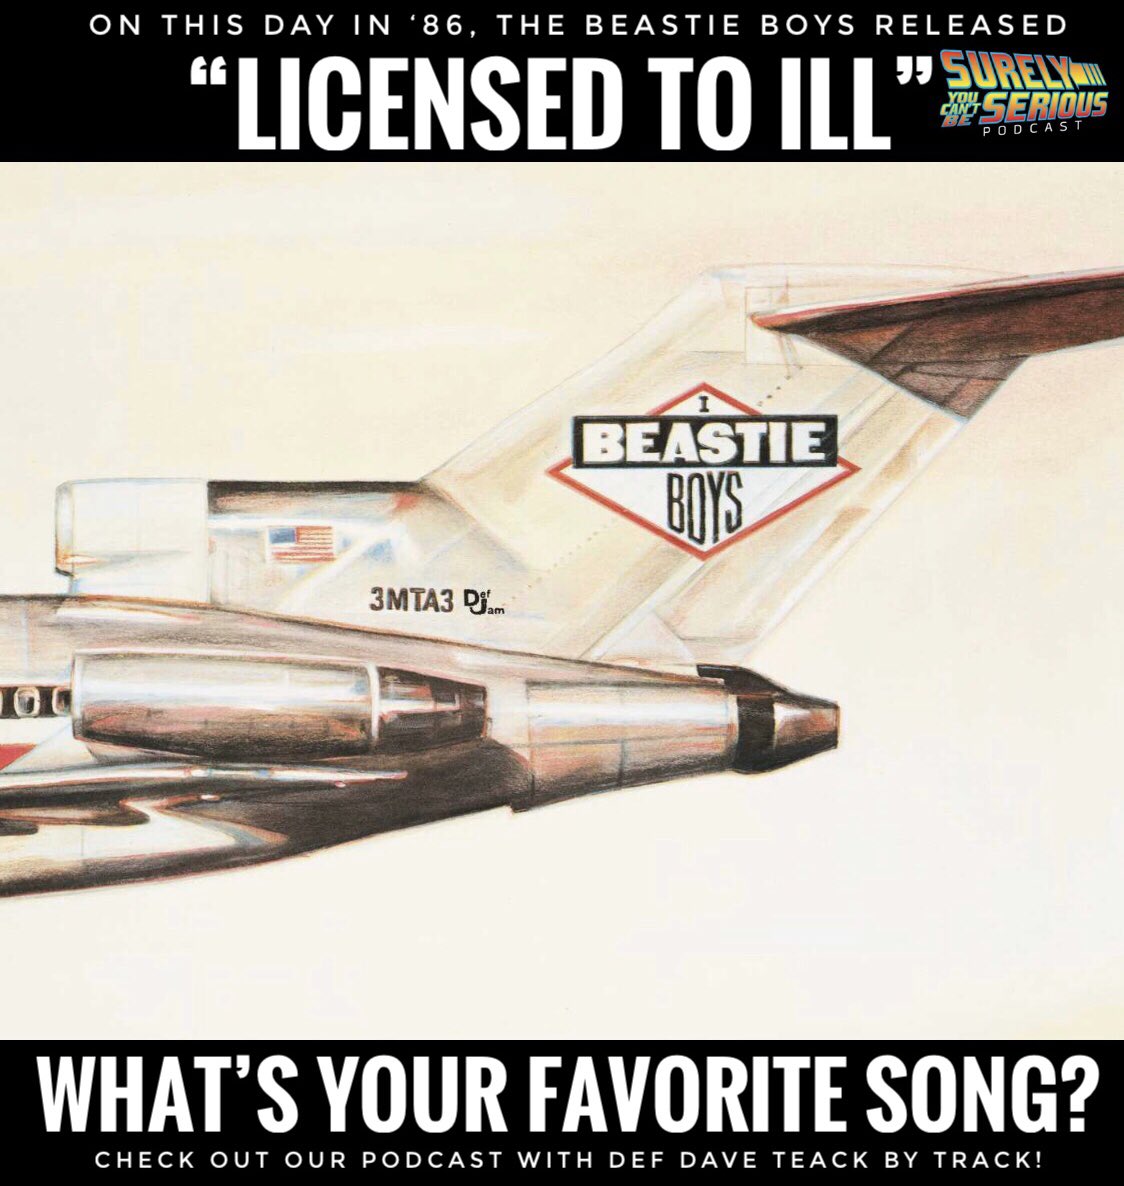 On this day in 1986 #BeastieBoys released #licensedtoill .  Join us a special guest @defdave as we go TRACK by TRACK!
#80s #80srap #1986music 

podcasts.apple.com/us/podcast/sur…